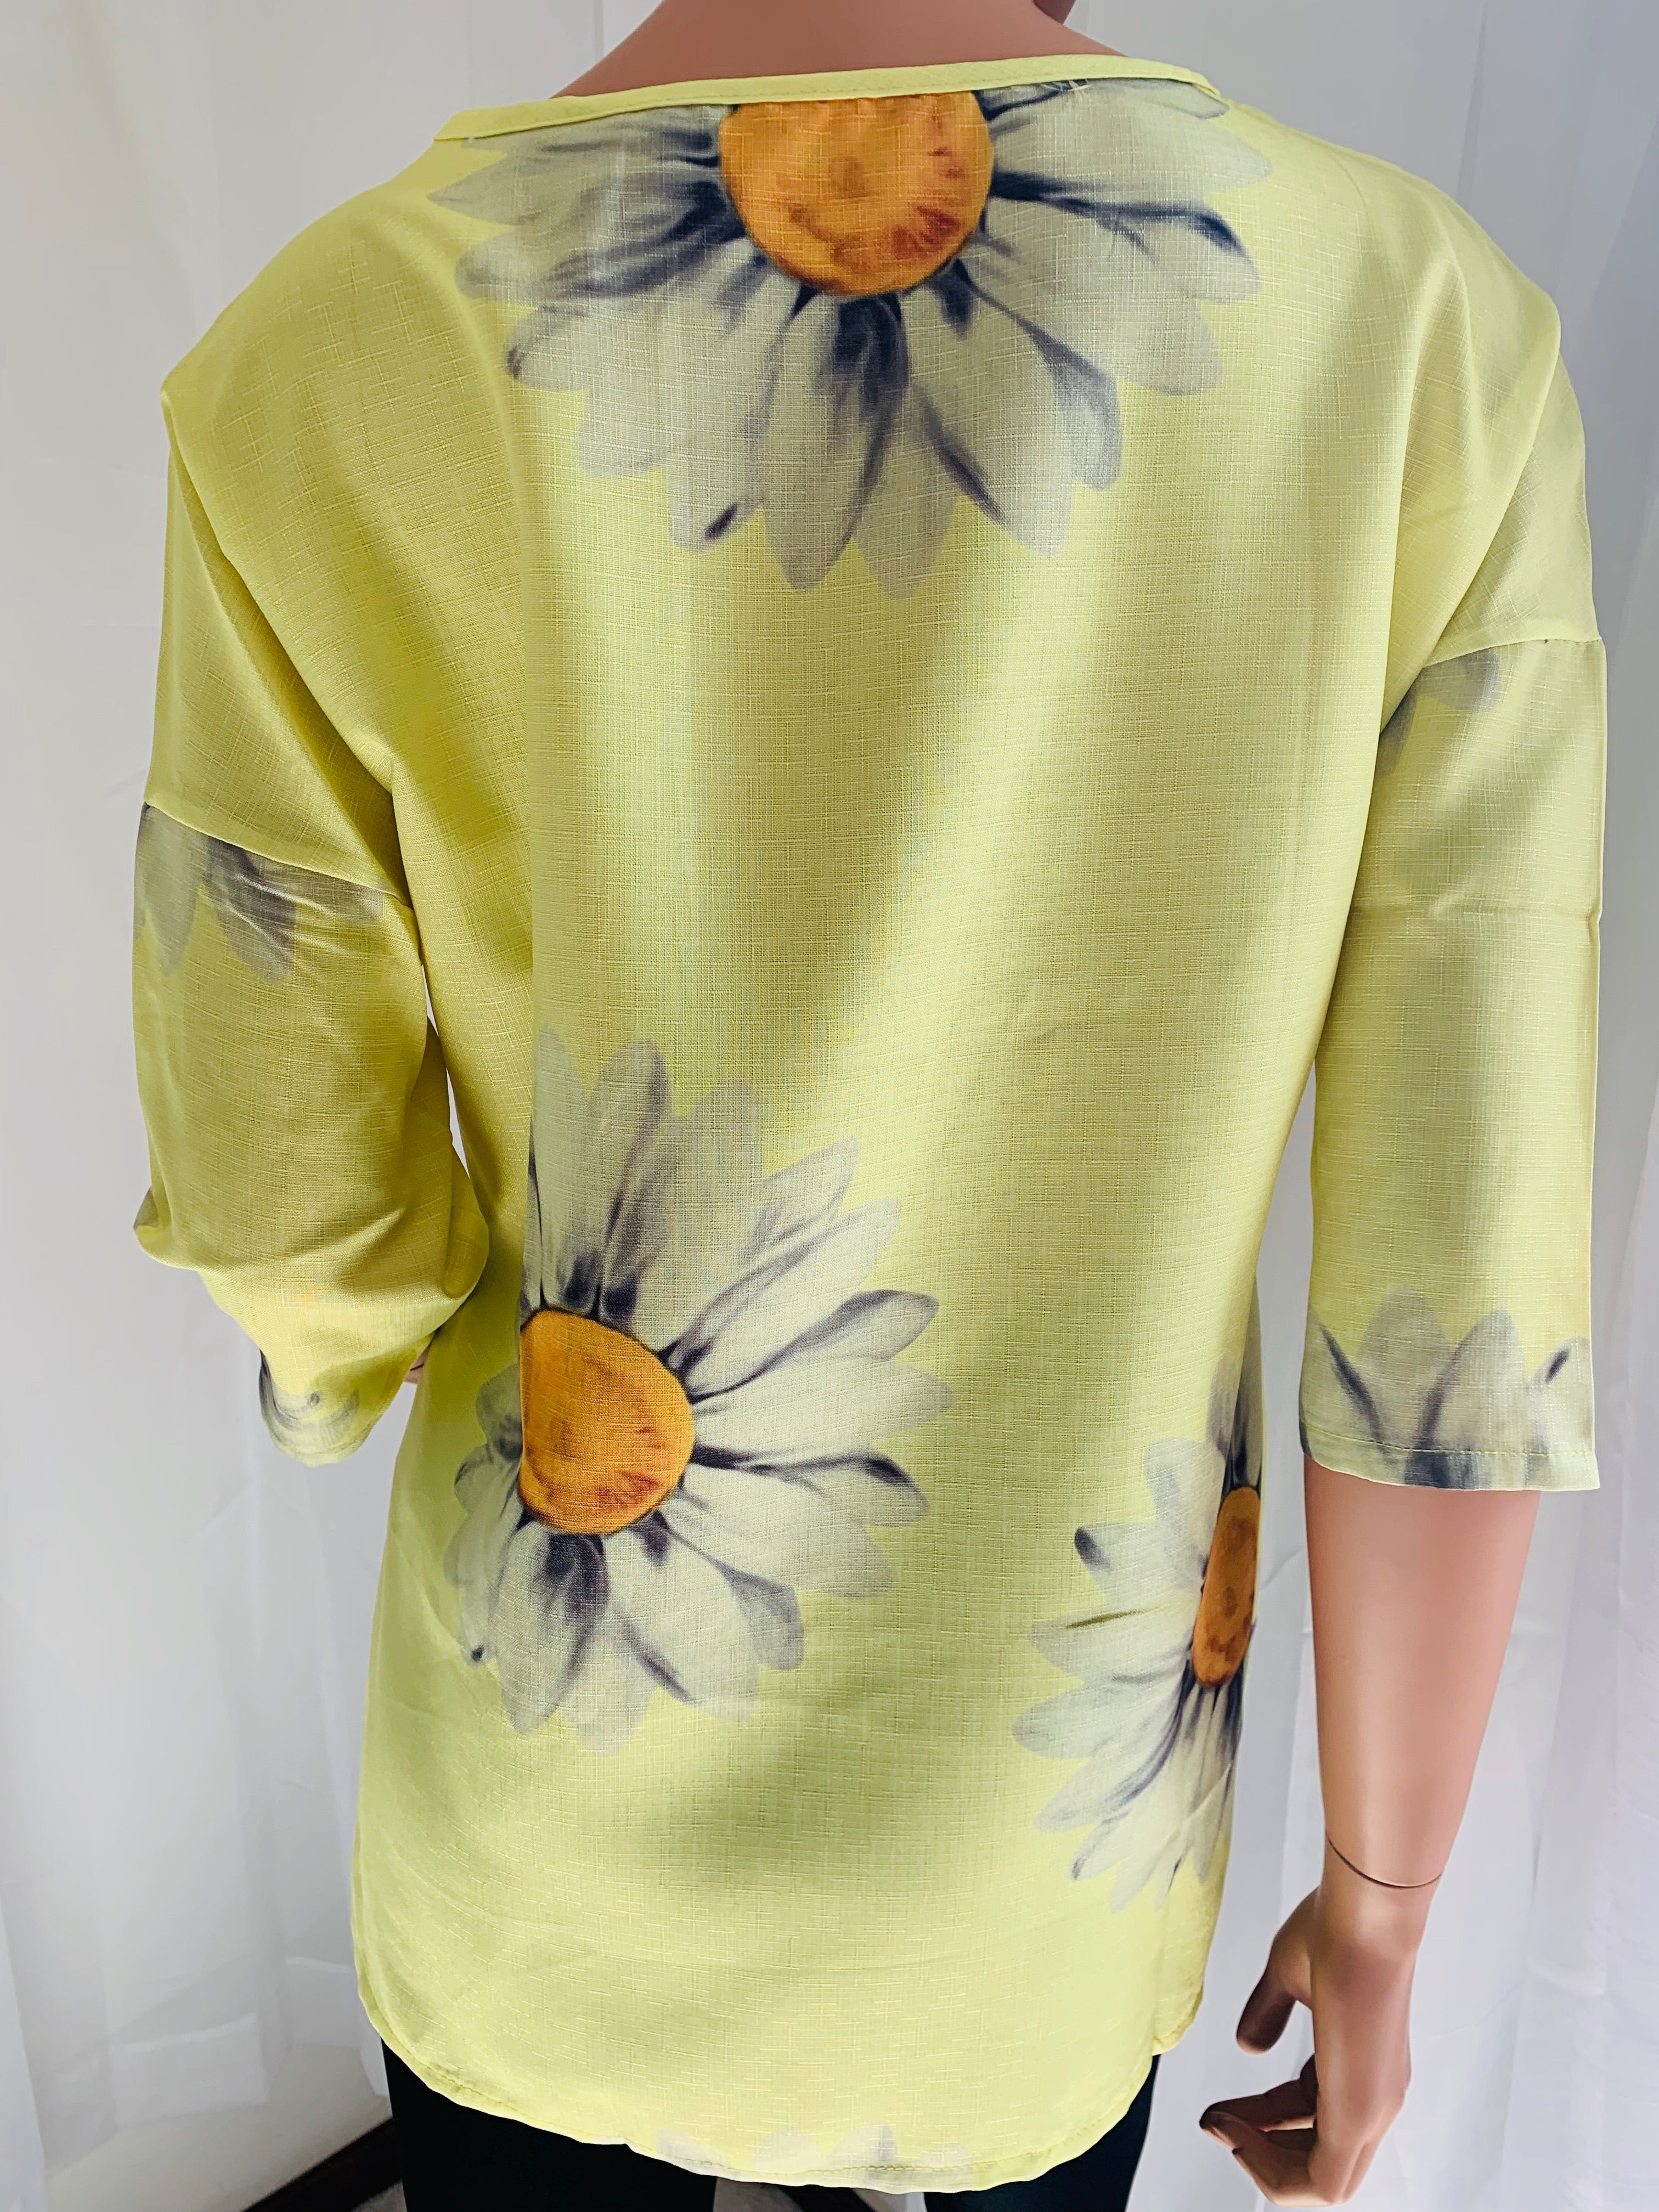 Relaxed fit cotton blend top with 3/4 sleeve. Vivid yellow color and trending daisy design makes this top wearable for any occasion.  Note: No stretch so they fit on the smaller end of size guide. This is a nice quality top! 